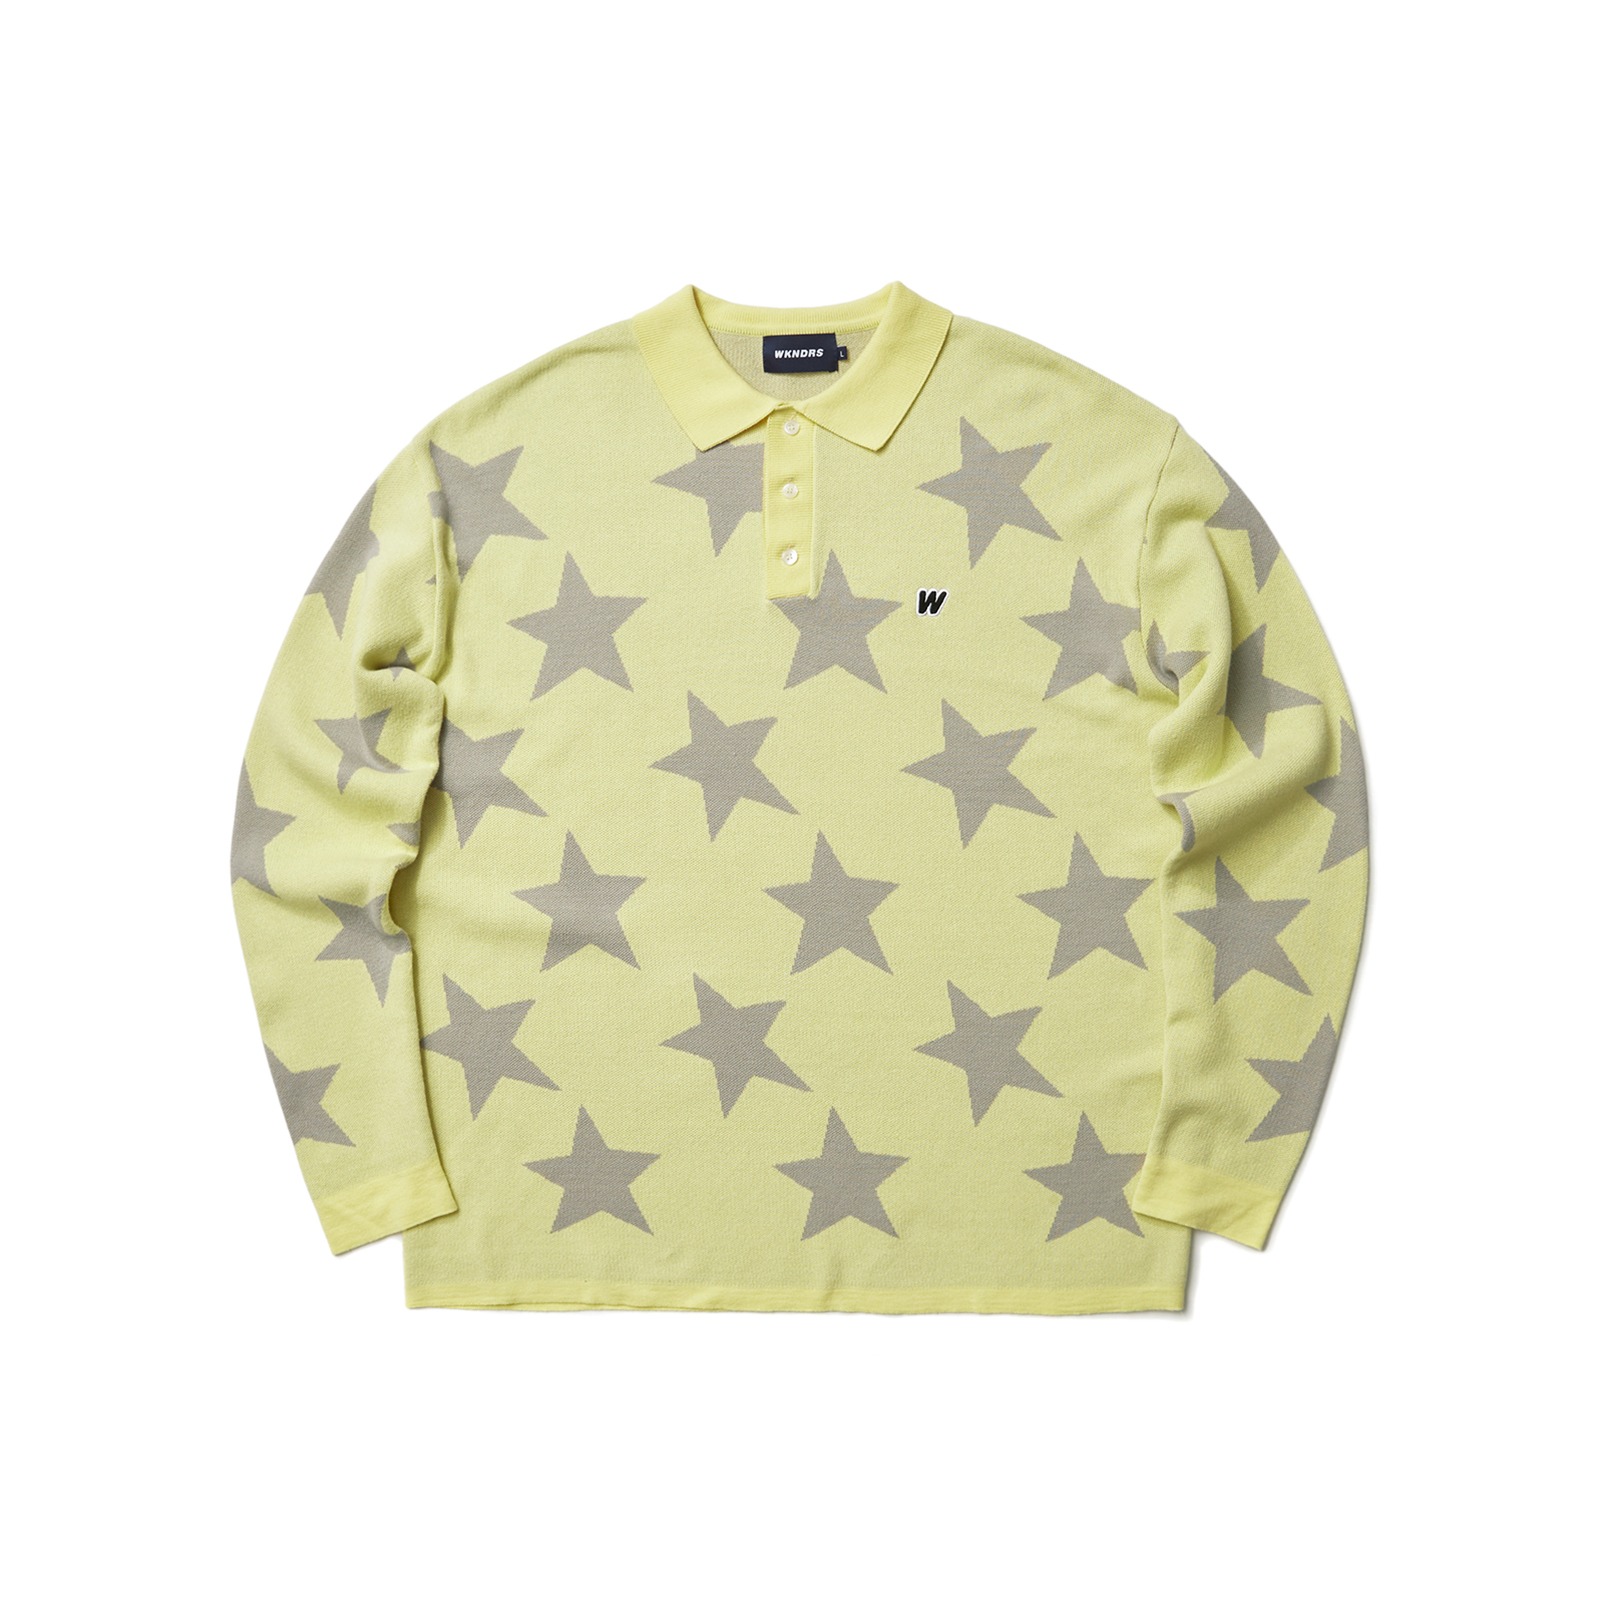 KNITTED STAR POLO SHIRT (YELLOW)